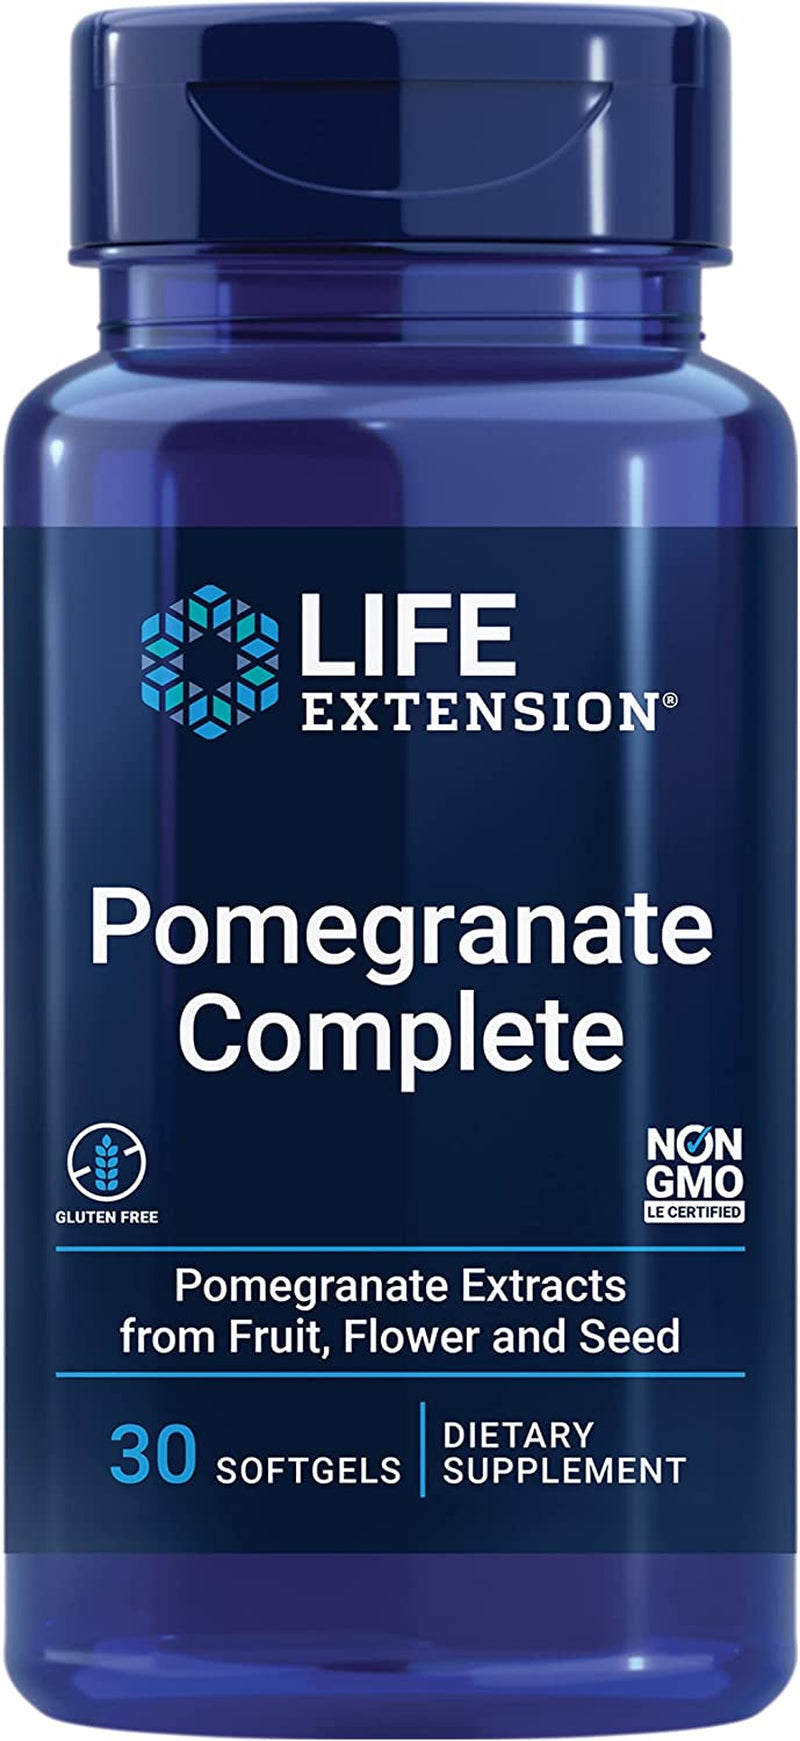 Life Extension Pomegranate Complete - Superfood Health Pomegranate Extract Supplement for Antioxidant Protection - Rich in Polyphenols, Fruit, Flower, Seed Extracts - Gluten-Free - 30 Softgels